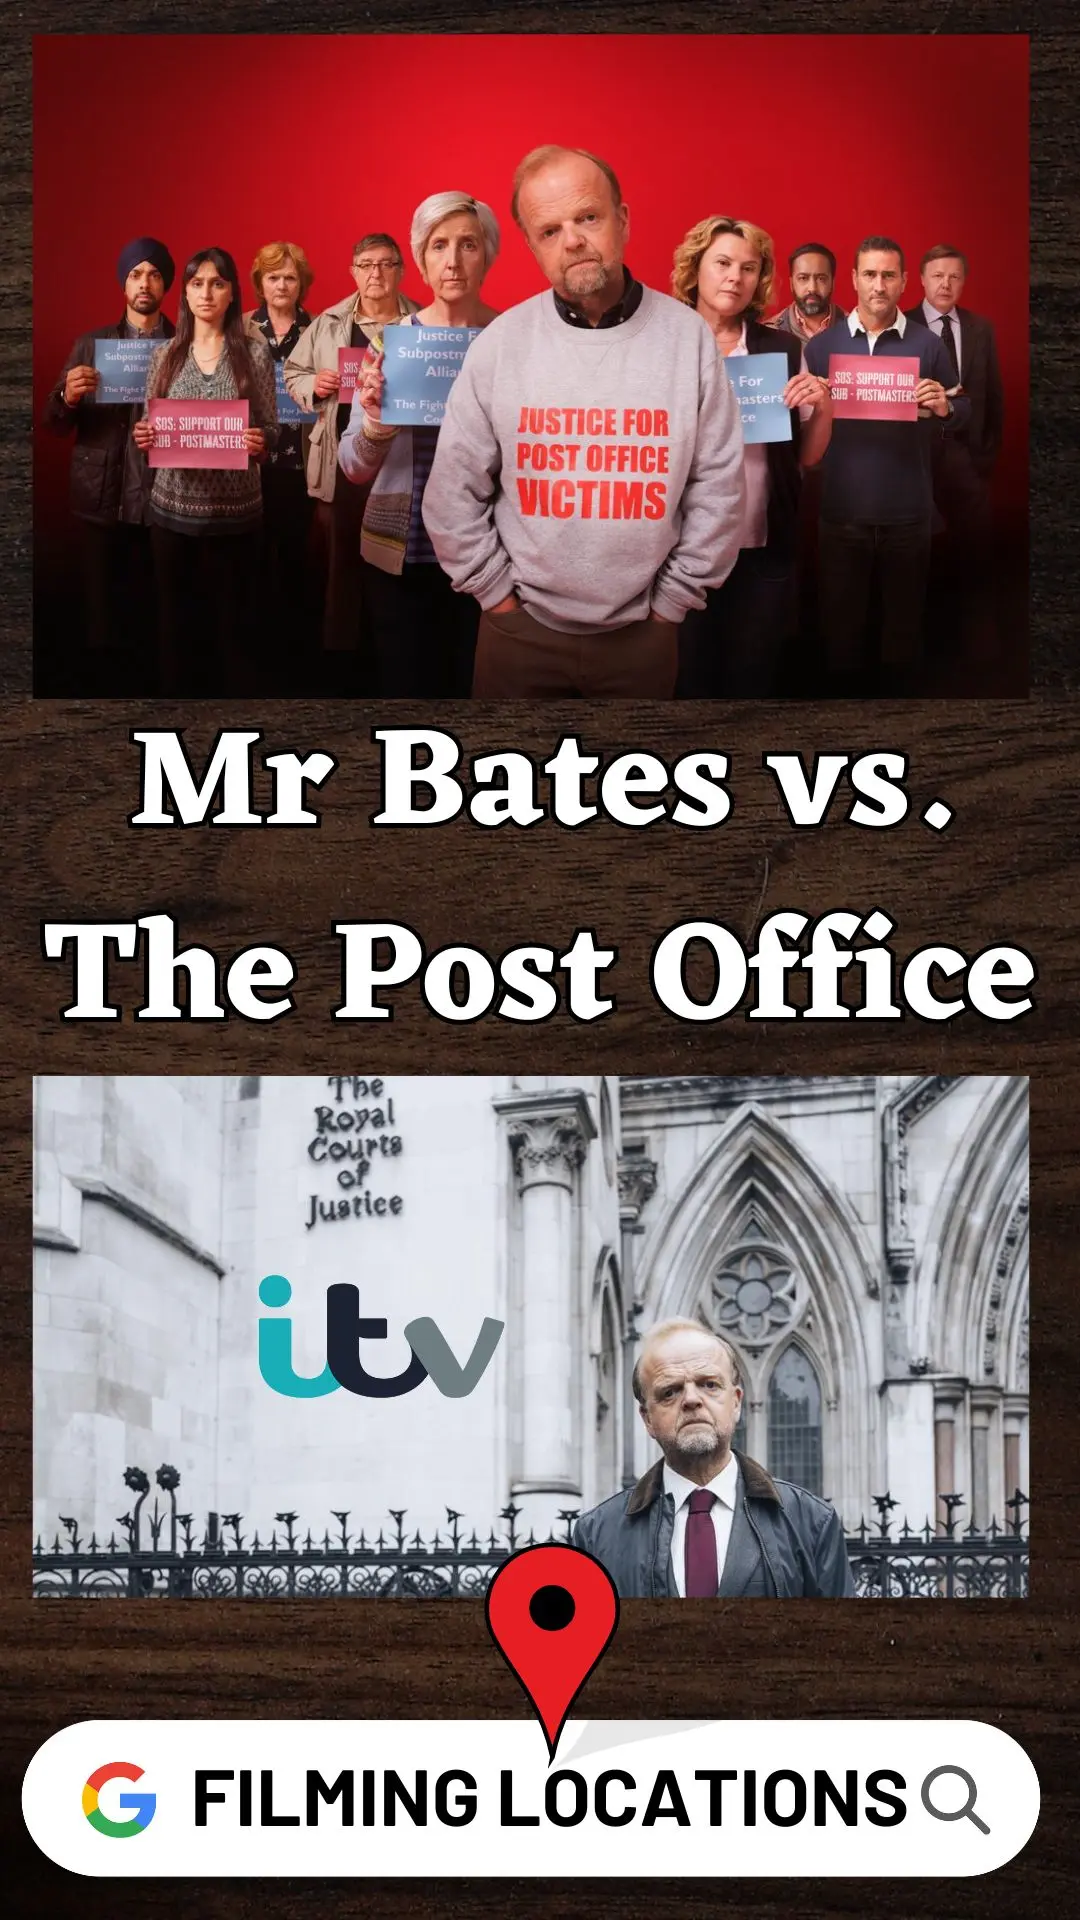 Mr Bates vs The Post Office Filming Locations